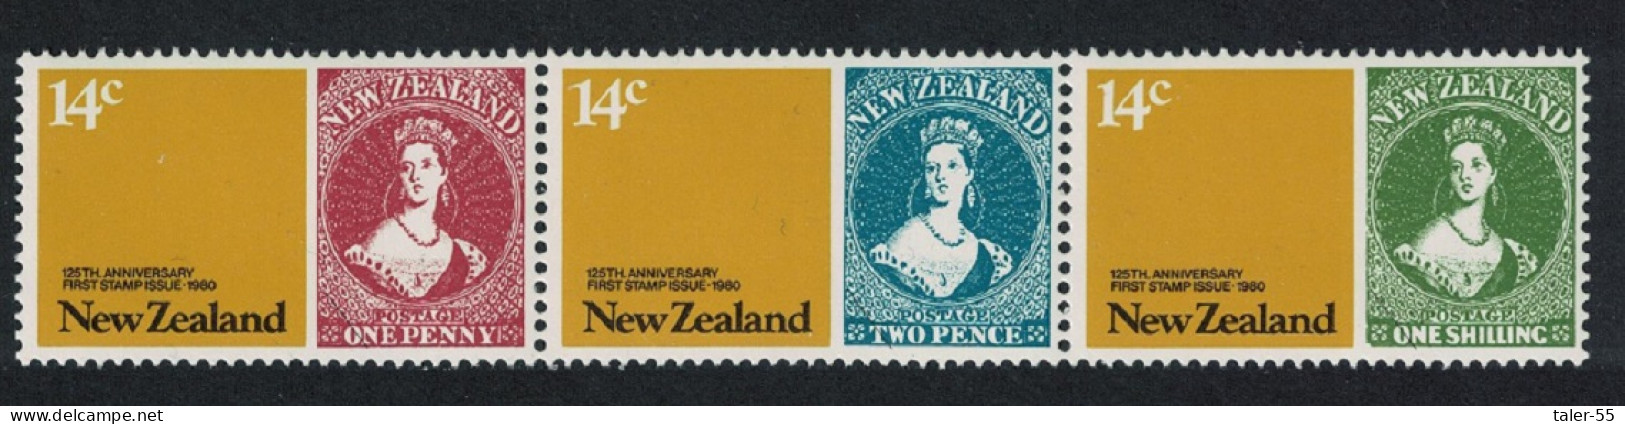 New Zealand 125th Anniversary Of Stamps Strip Of 3v 1980 MNH SG#1210-1212 - Neufs